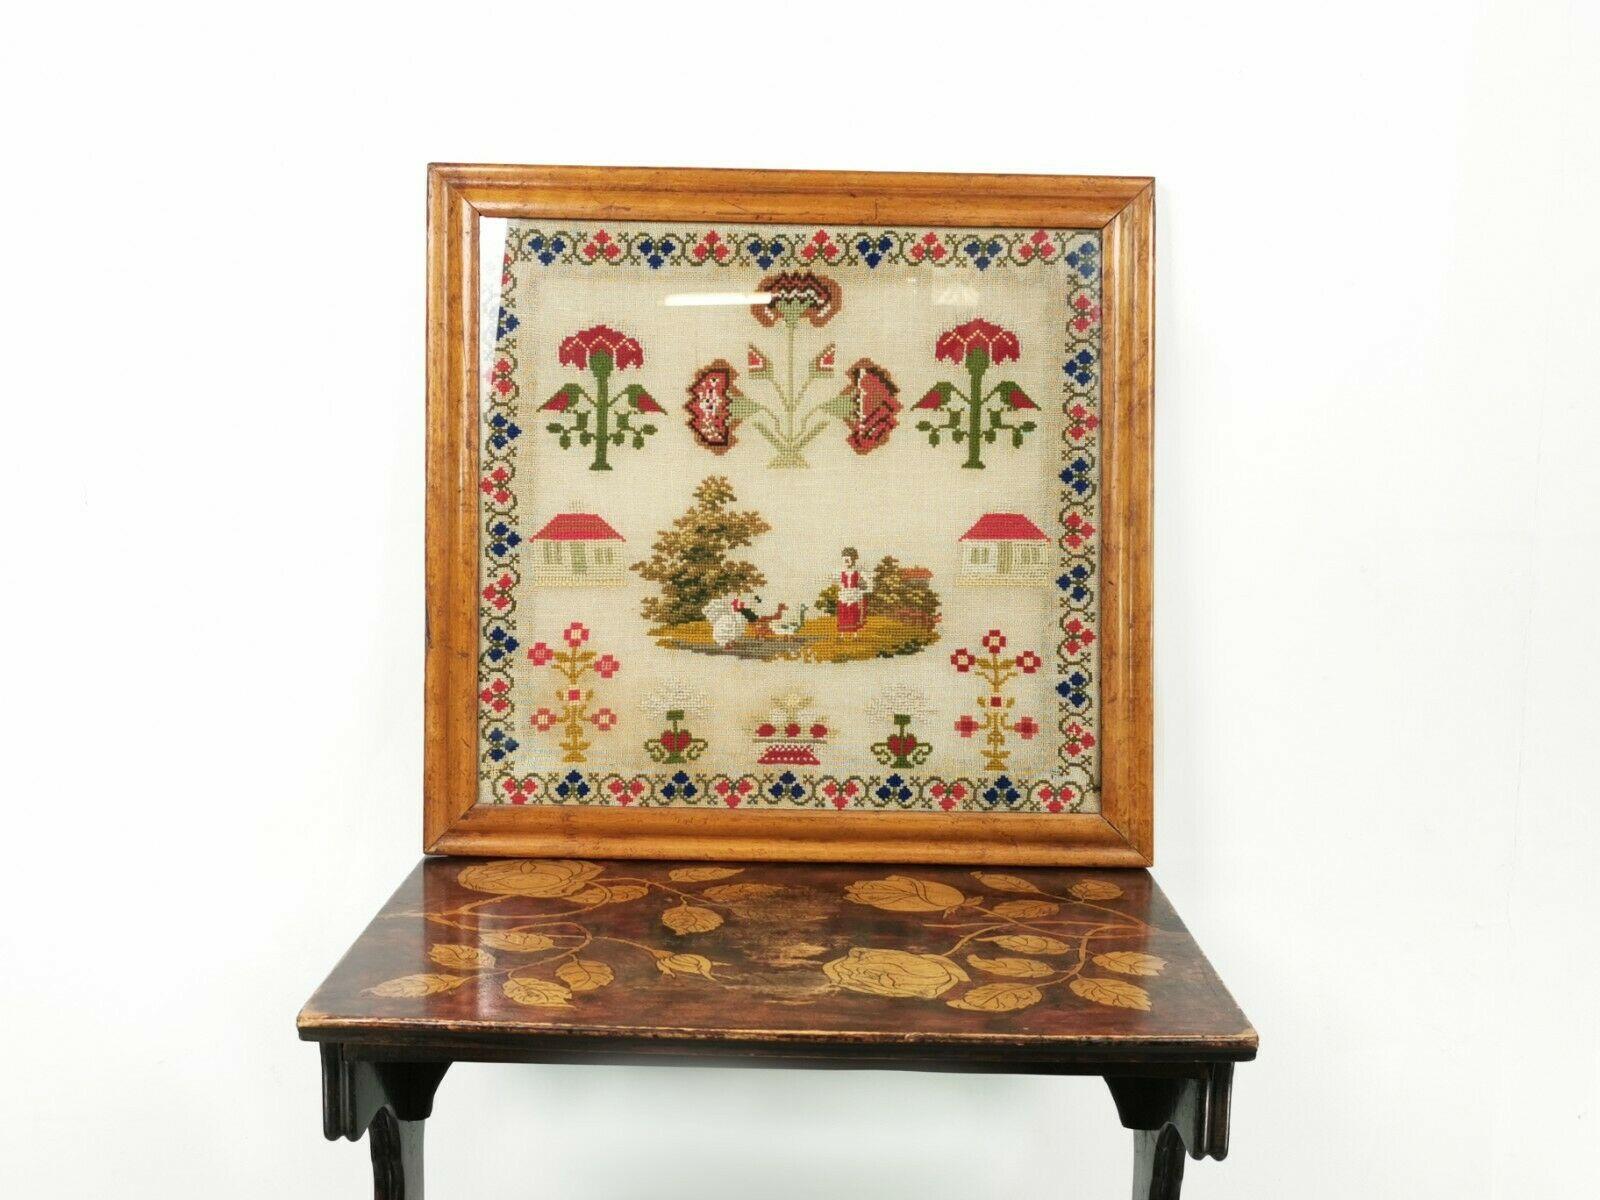 Victorian woolwork sampler

A brightly coloured 19th century Victorian woolwork sampler in a detailed maple frame.

For sale is a brightly coloured Victorian woolwork sampler. The sampler is of a typical Victorian scene. A young woman is feeding